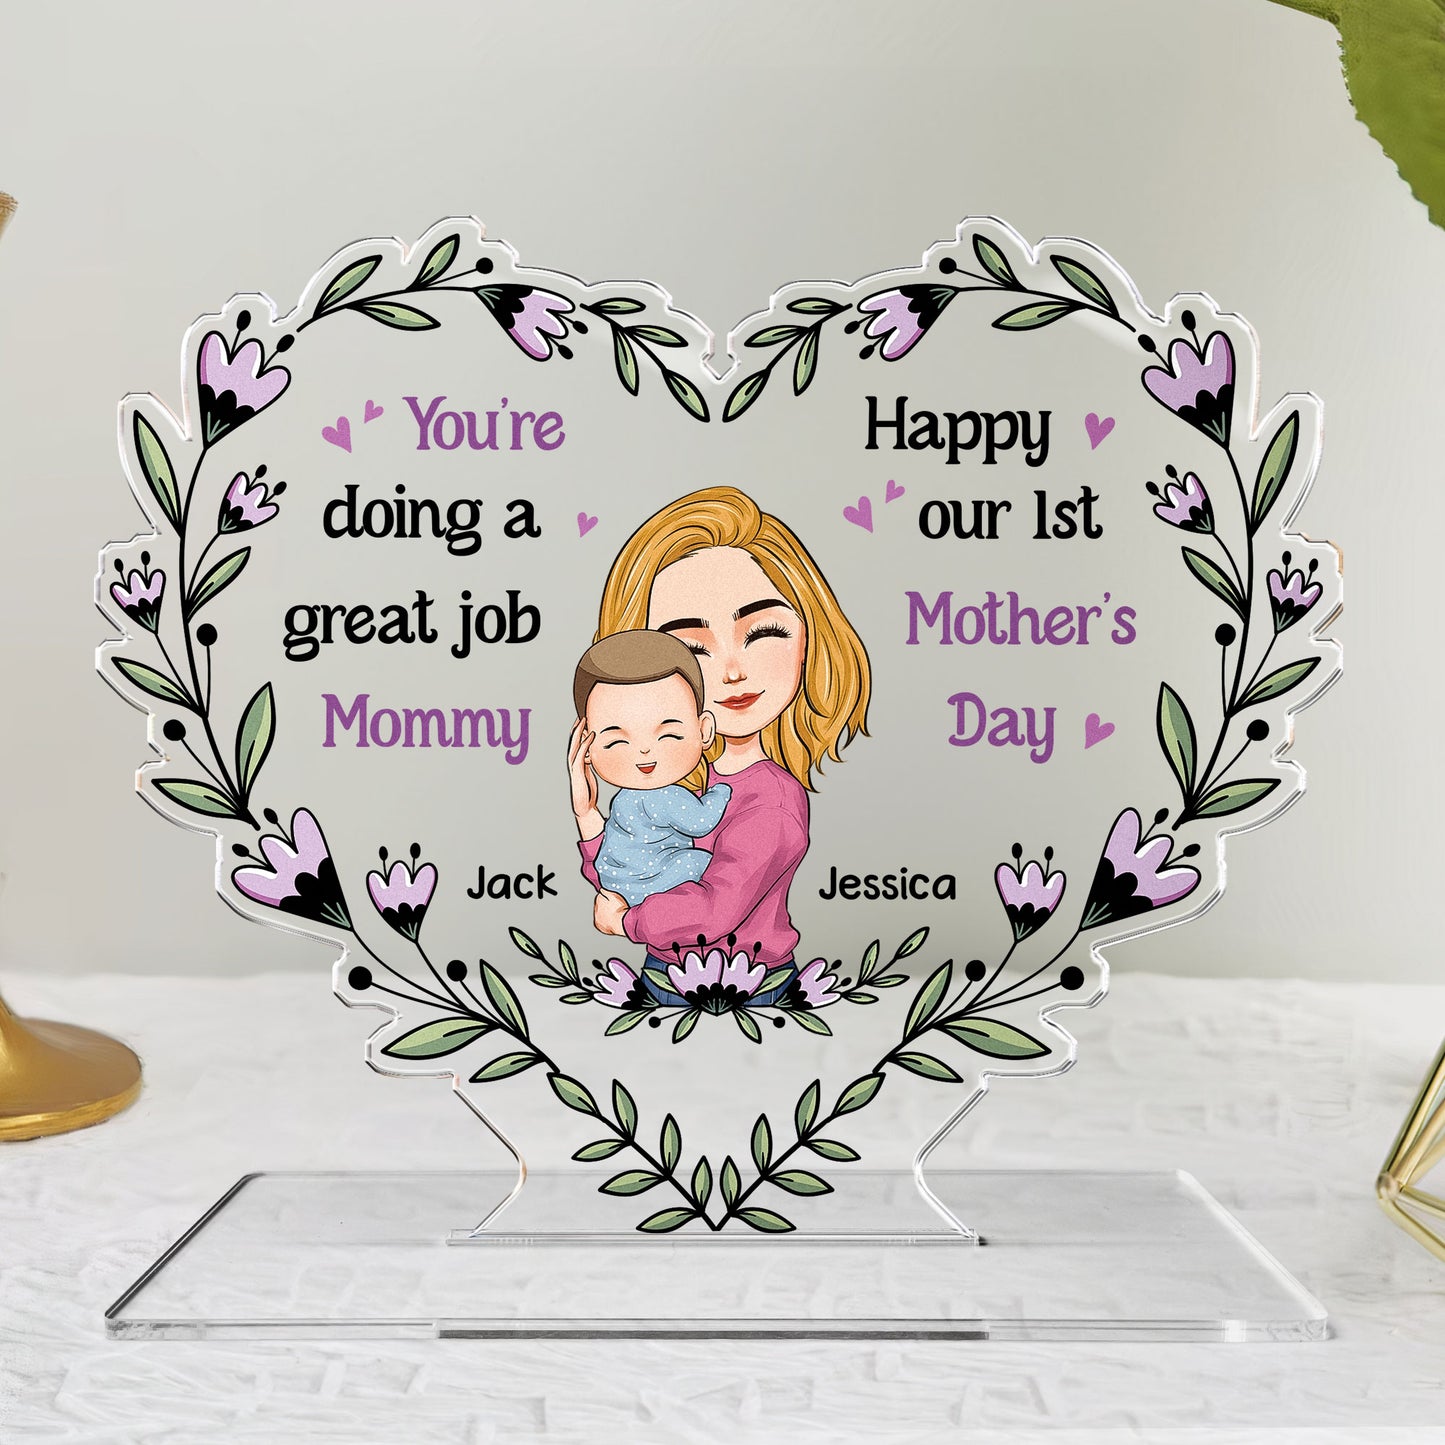 You're Doing A Great Job Mommy - Personalized Acrylic Plaque